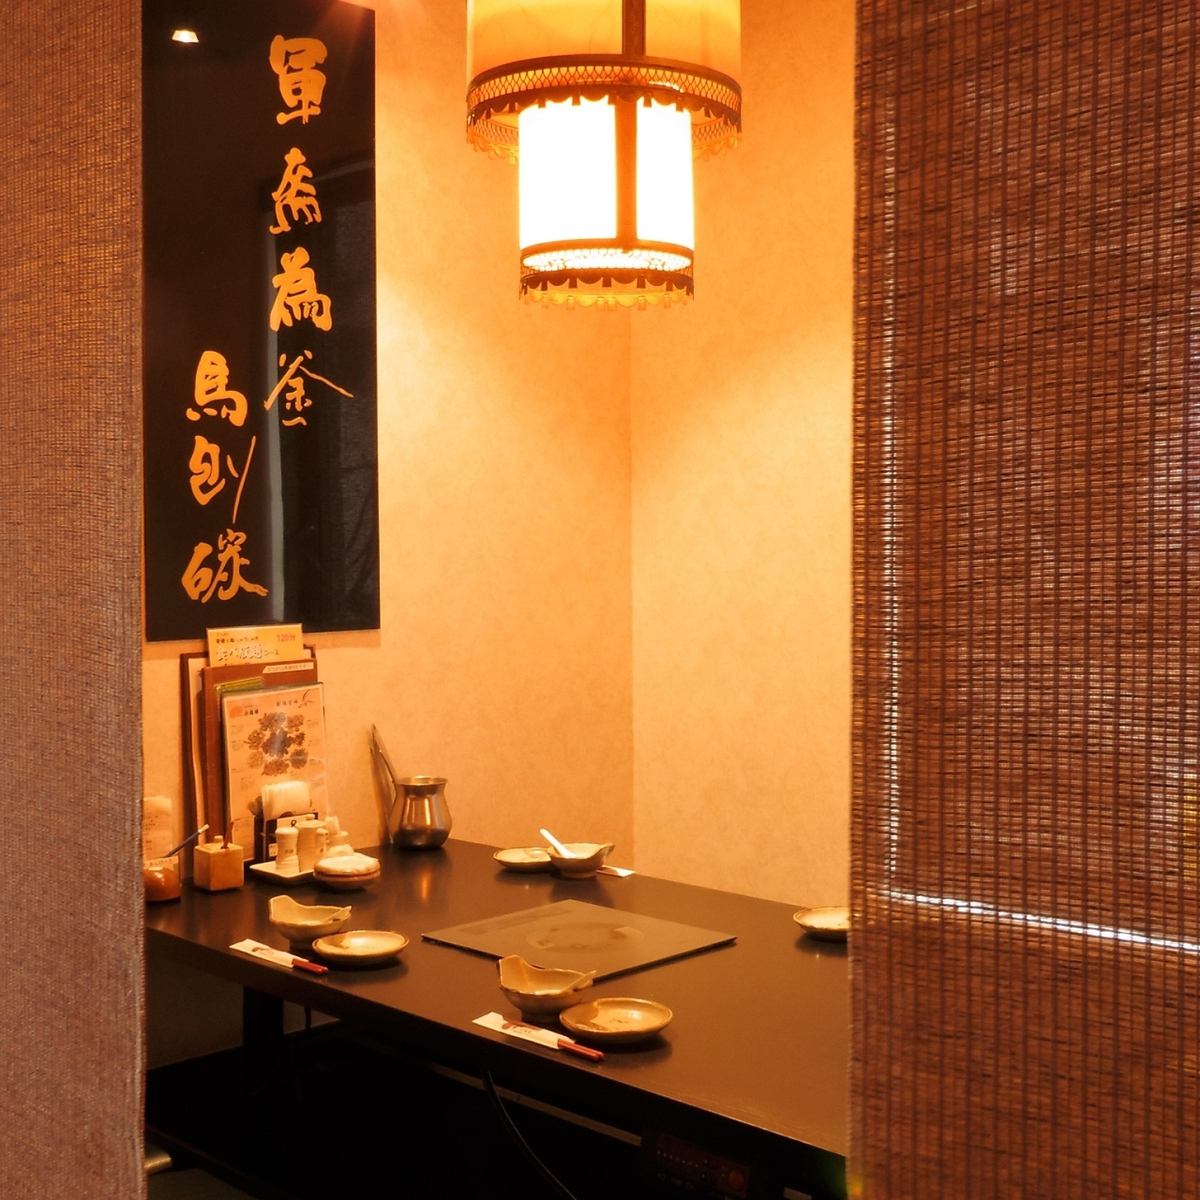 Enjoy your meal in a private room with a calm atmosphere! Accommodates 2 to 10 people!